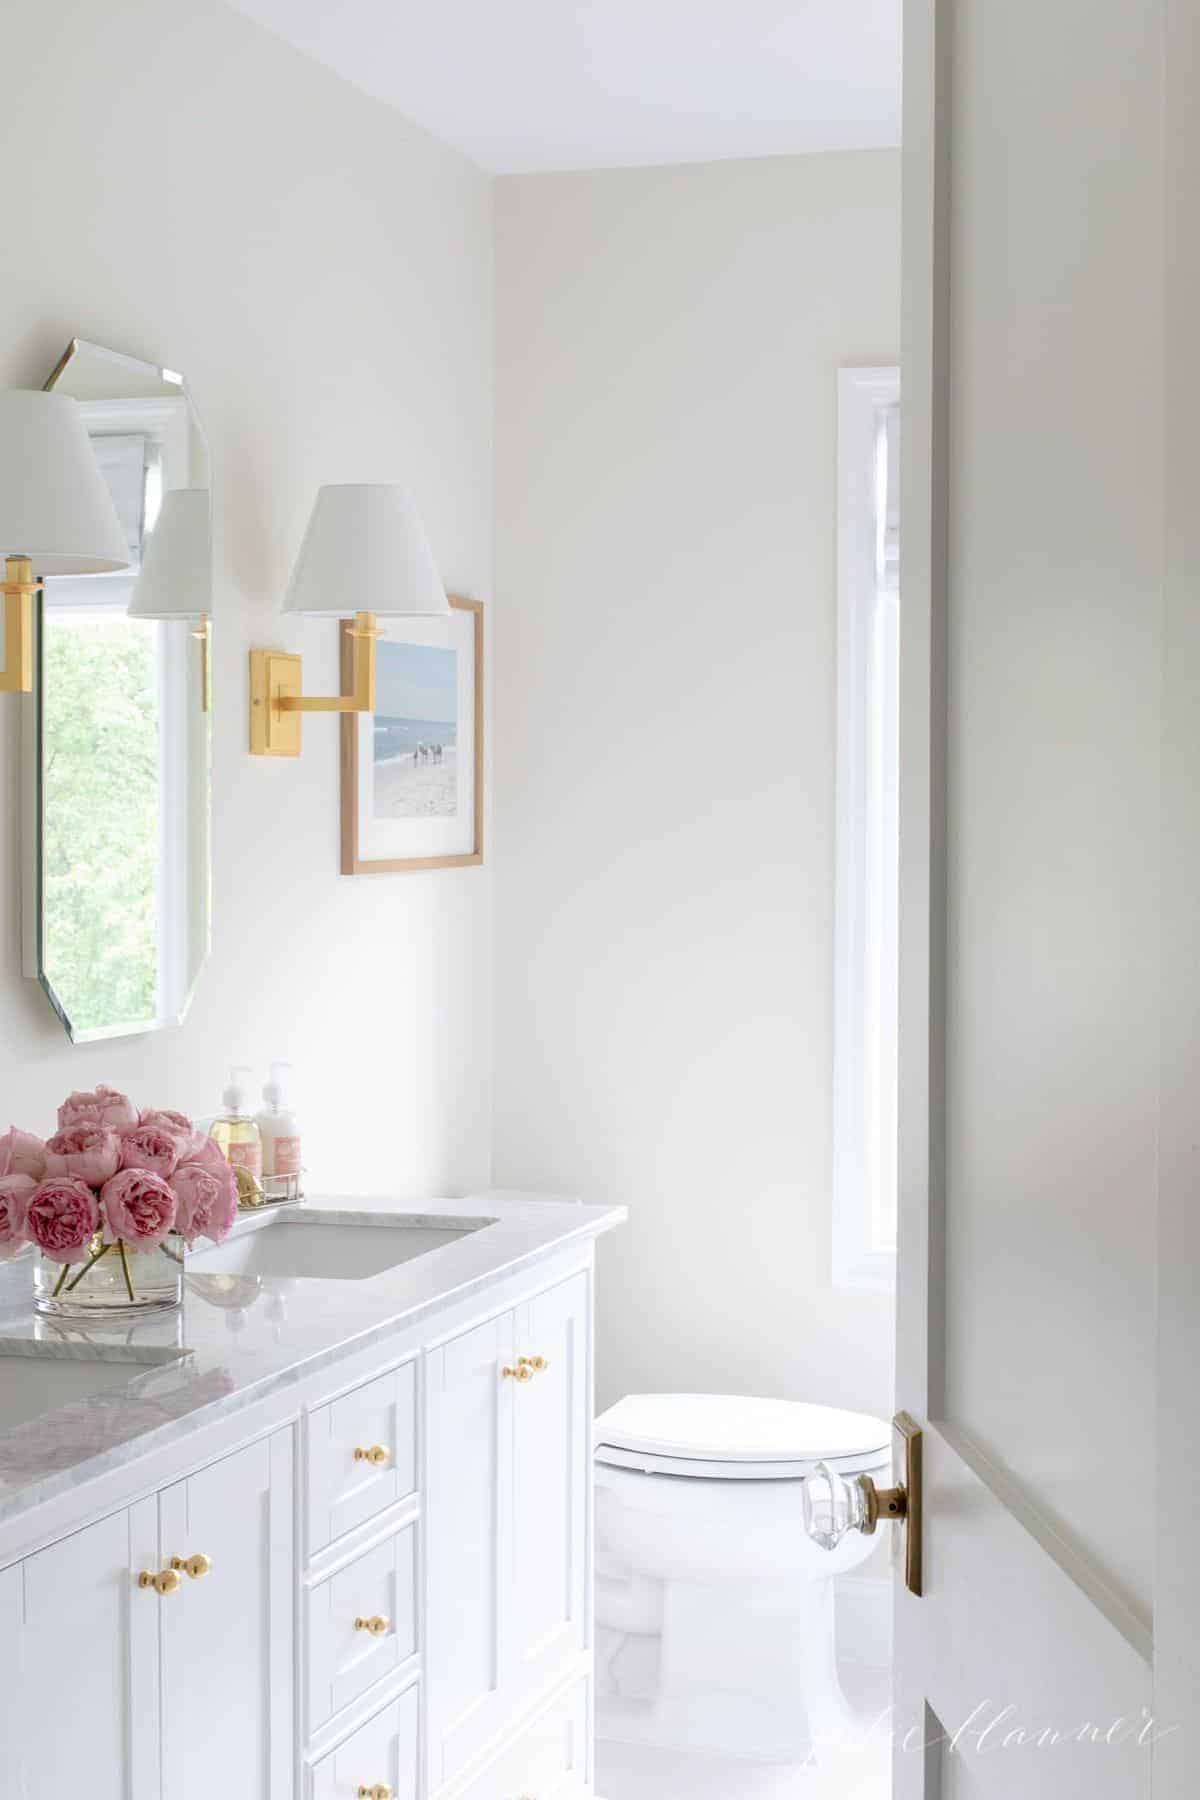 A white vanity cabinet in a bathroom with gold cabinet door knobs.